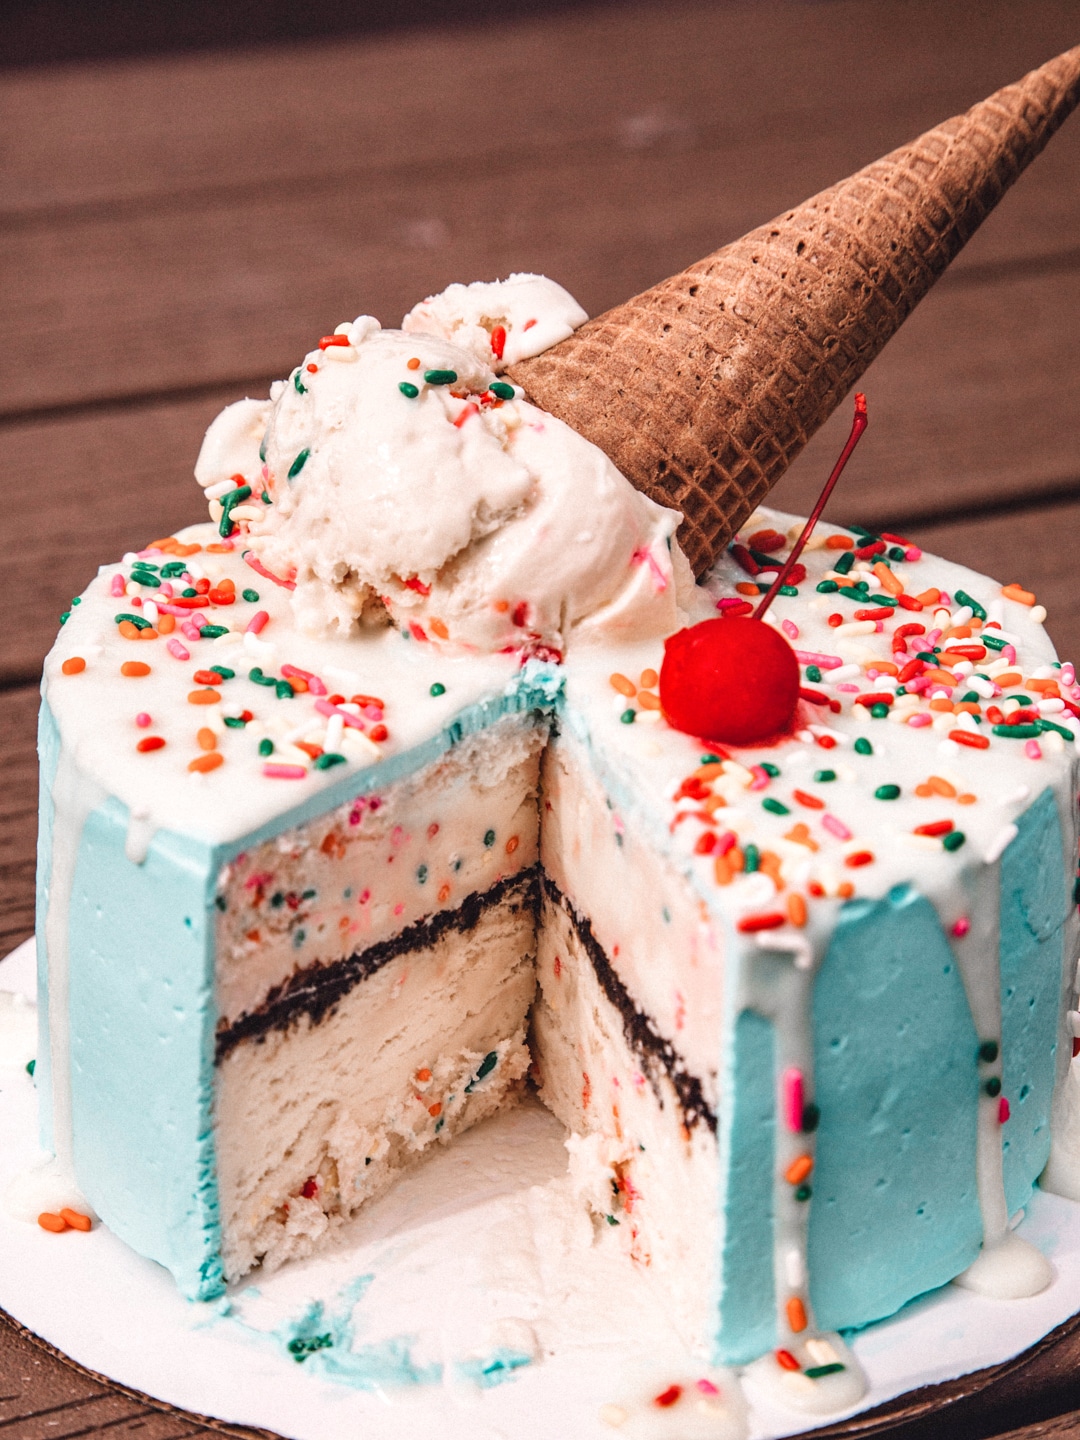 ice cream and cake games for android download